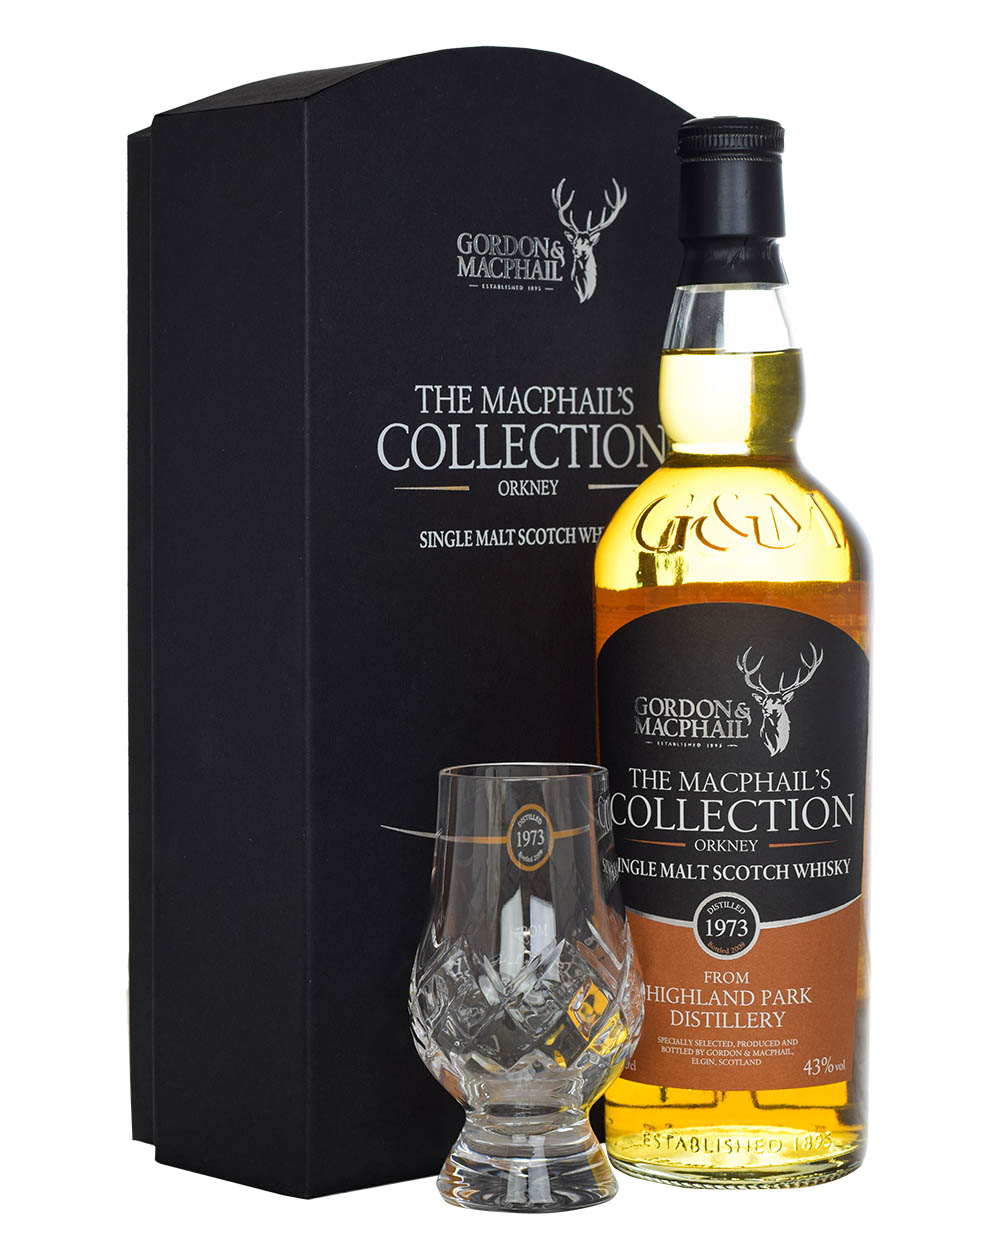 Highland Park 1973 The Macphail's Collection Box 2 Musthave Malts MHM